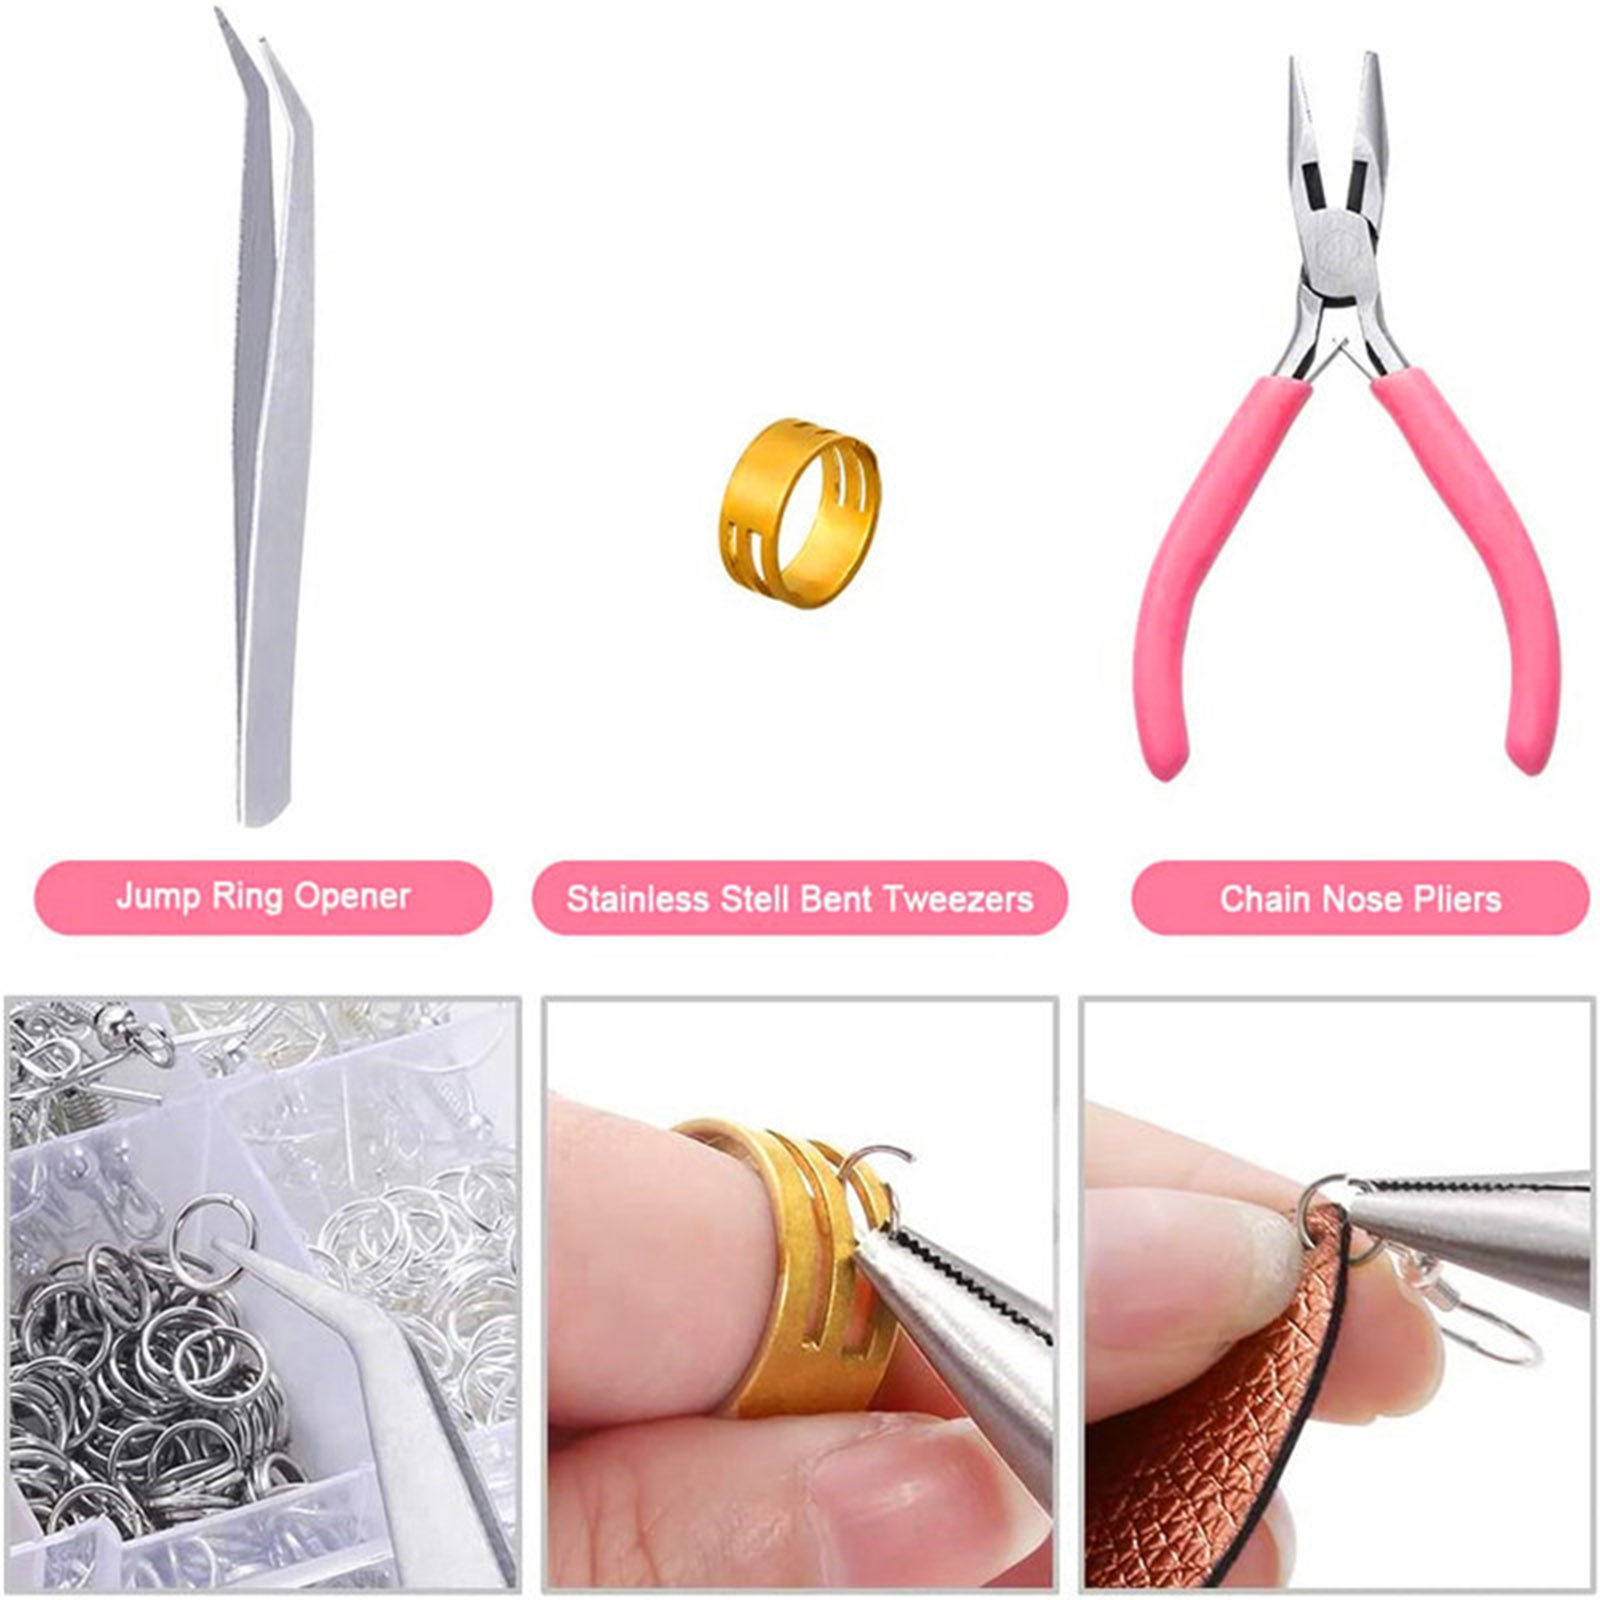 Picture of Zinc Based Alloy Ear Wire Jump Rings Jewelry Accessories Findings Mixed Color With Tools 13cm x 6.5cm, 1 Set